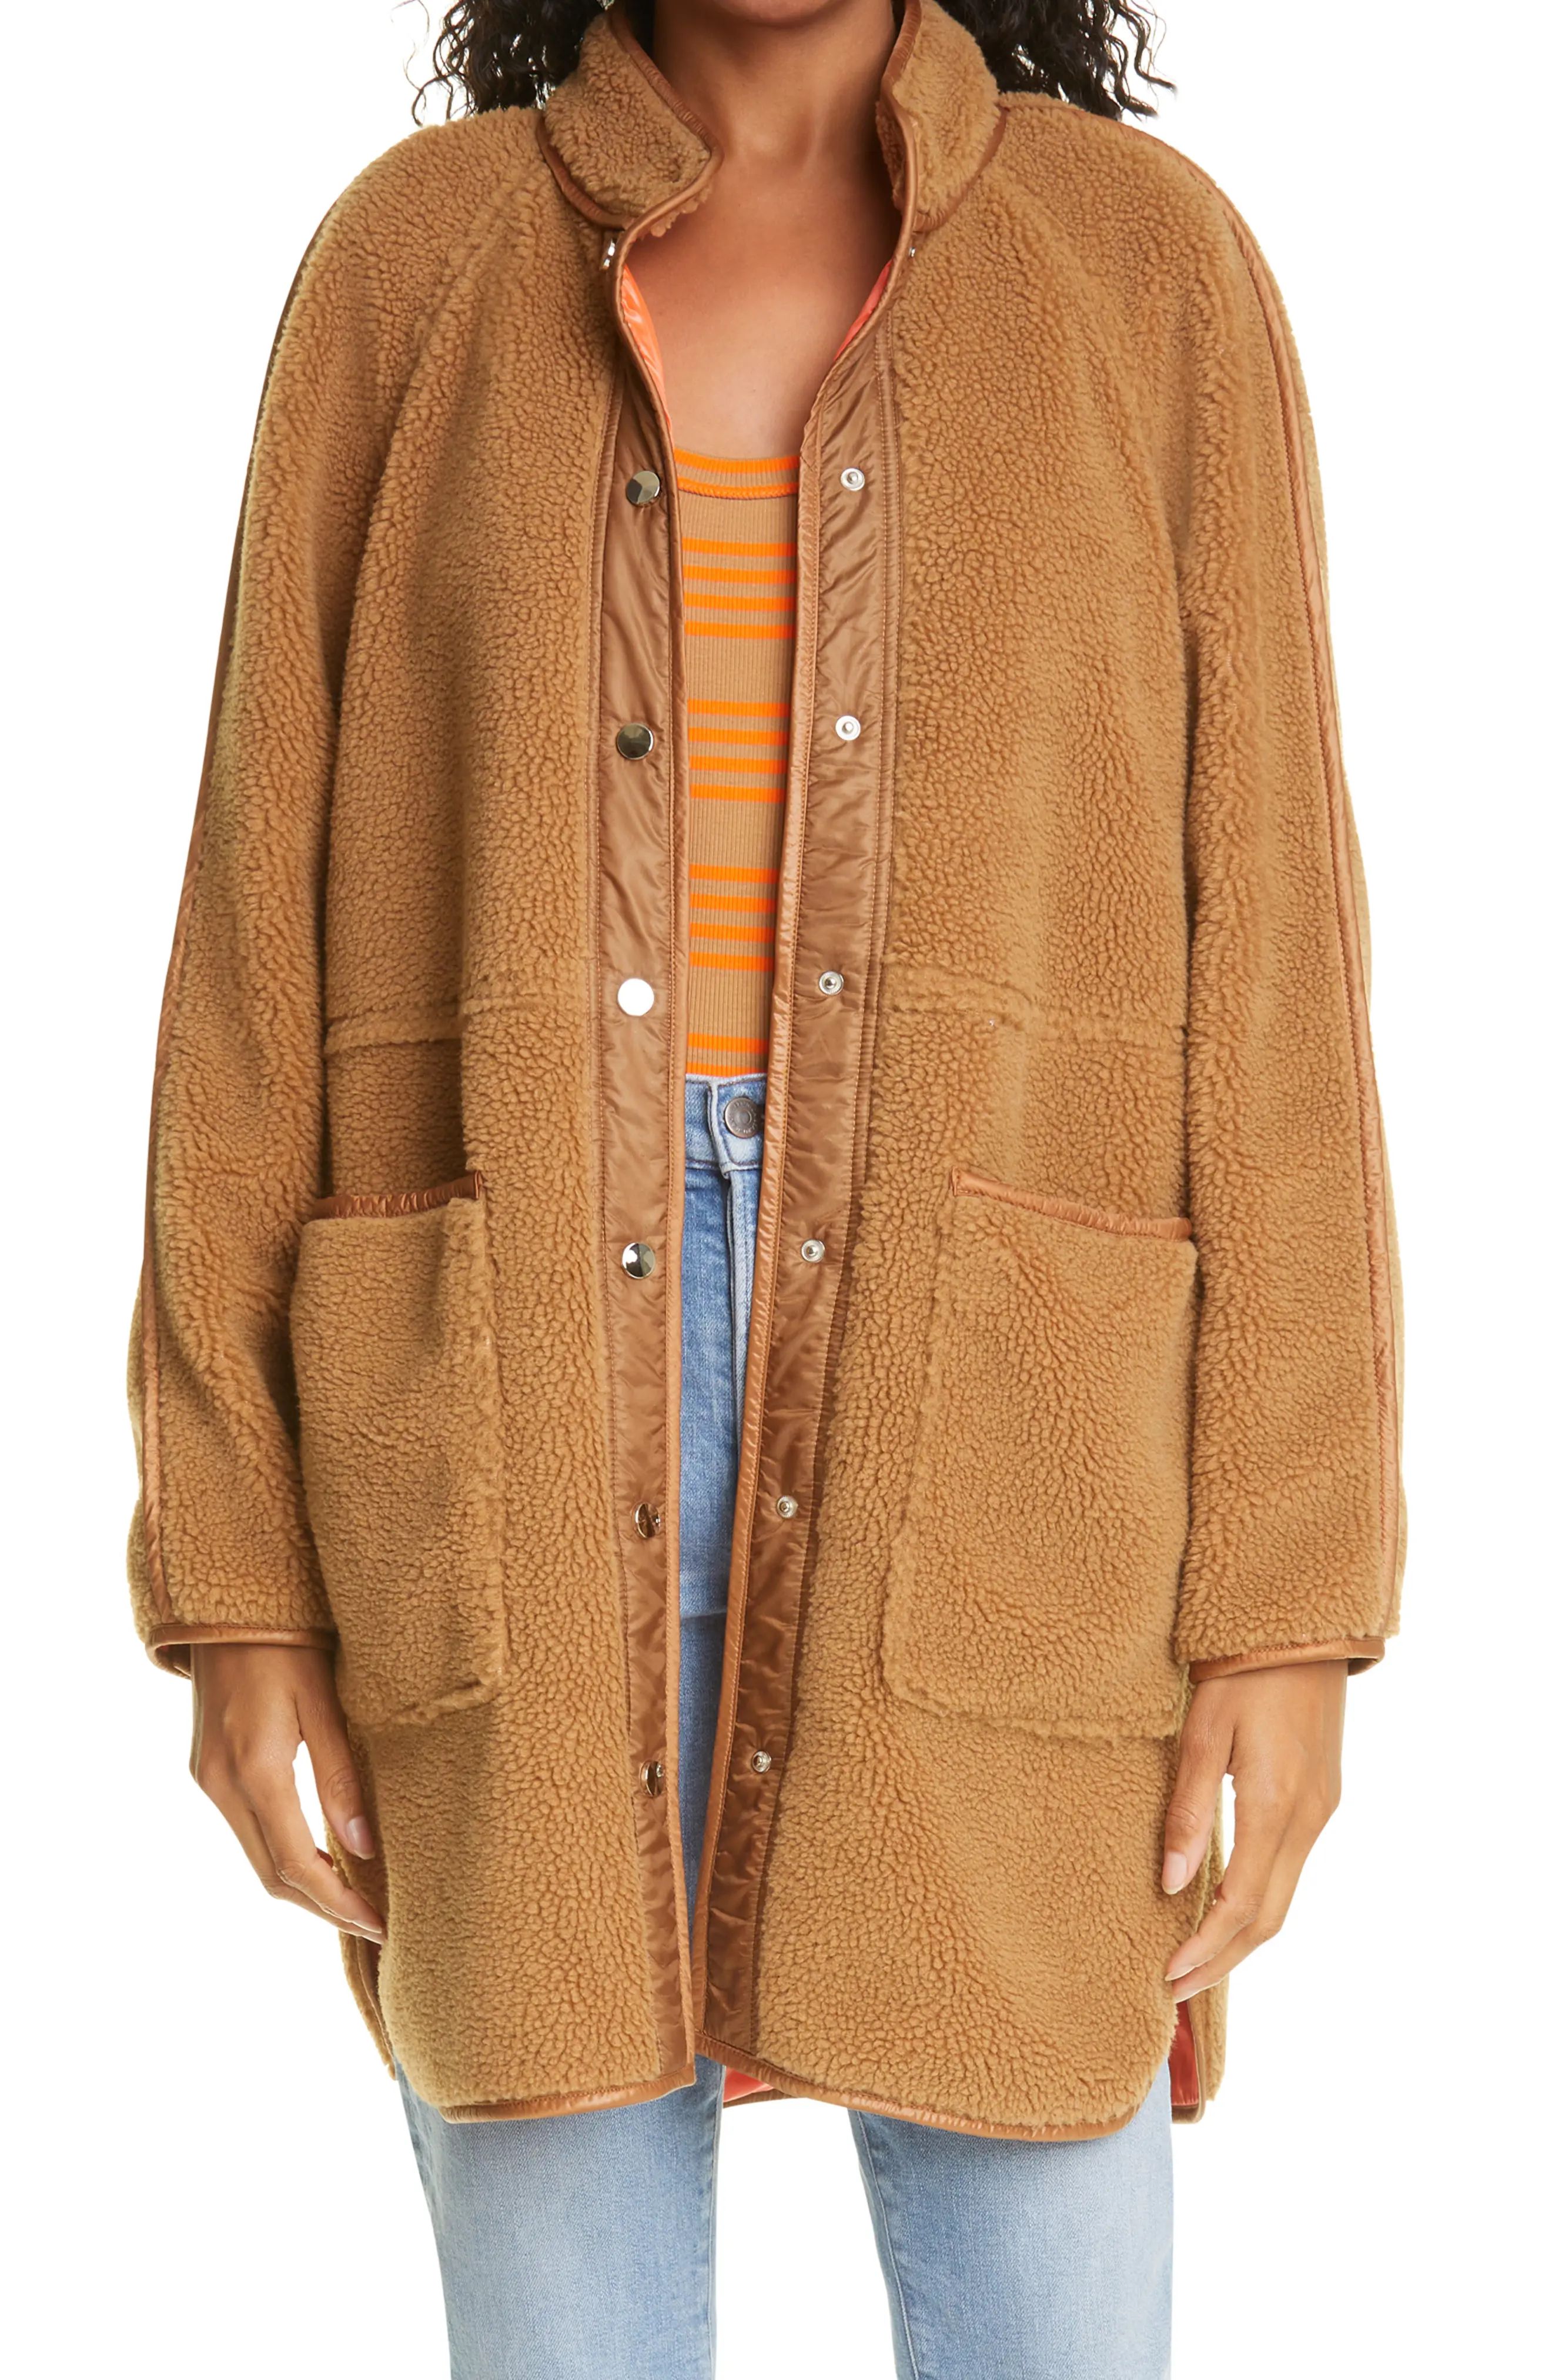 Veronica Beard Sullie High-Pile Fleece Jacket in Teddy Brown at Nordstrom, Size X-Small | Nordstrom